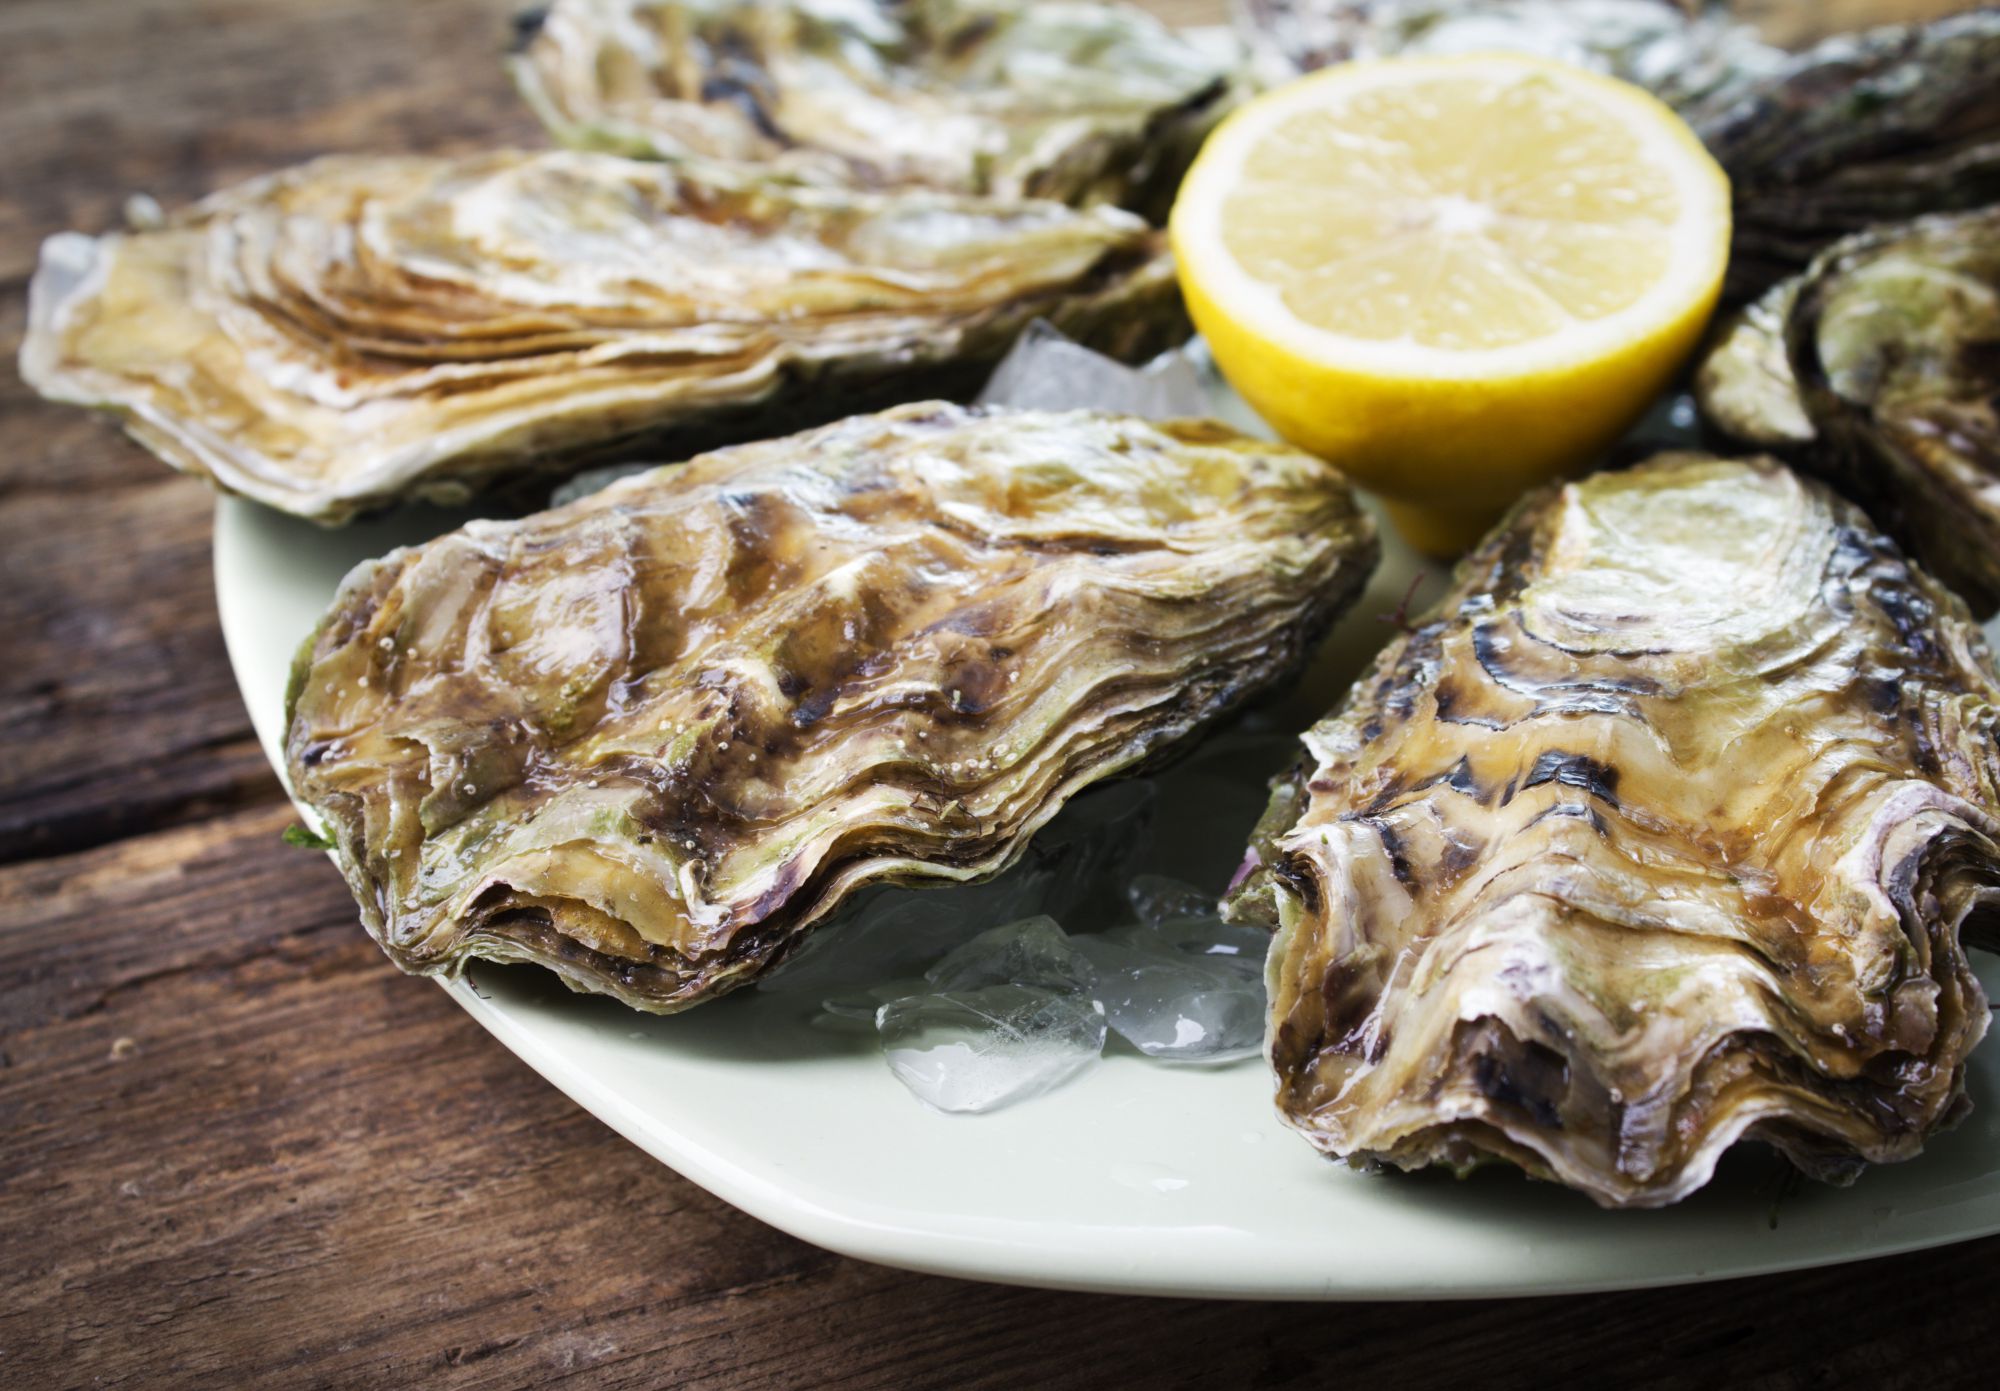 Oysters available from Euclid Fish Company in Cleveland, Ohio